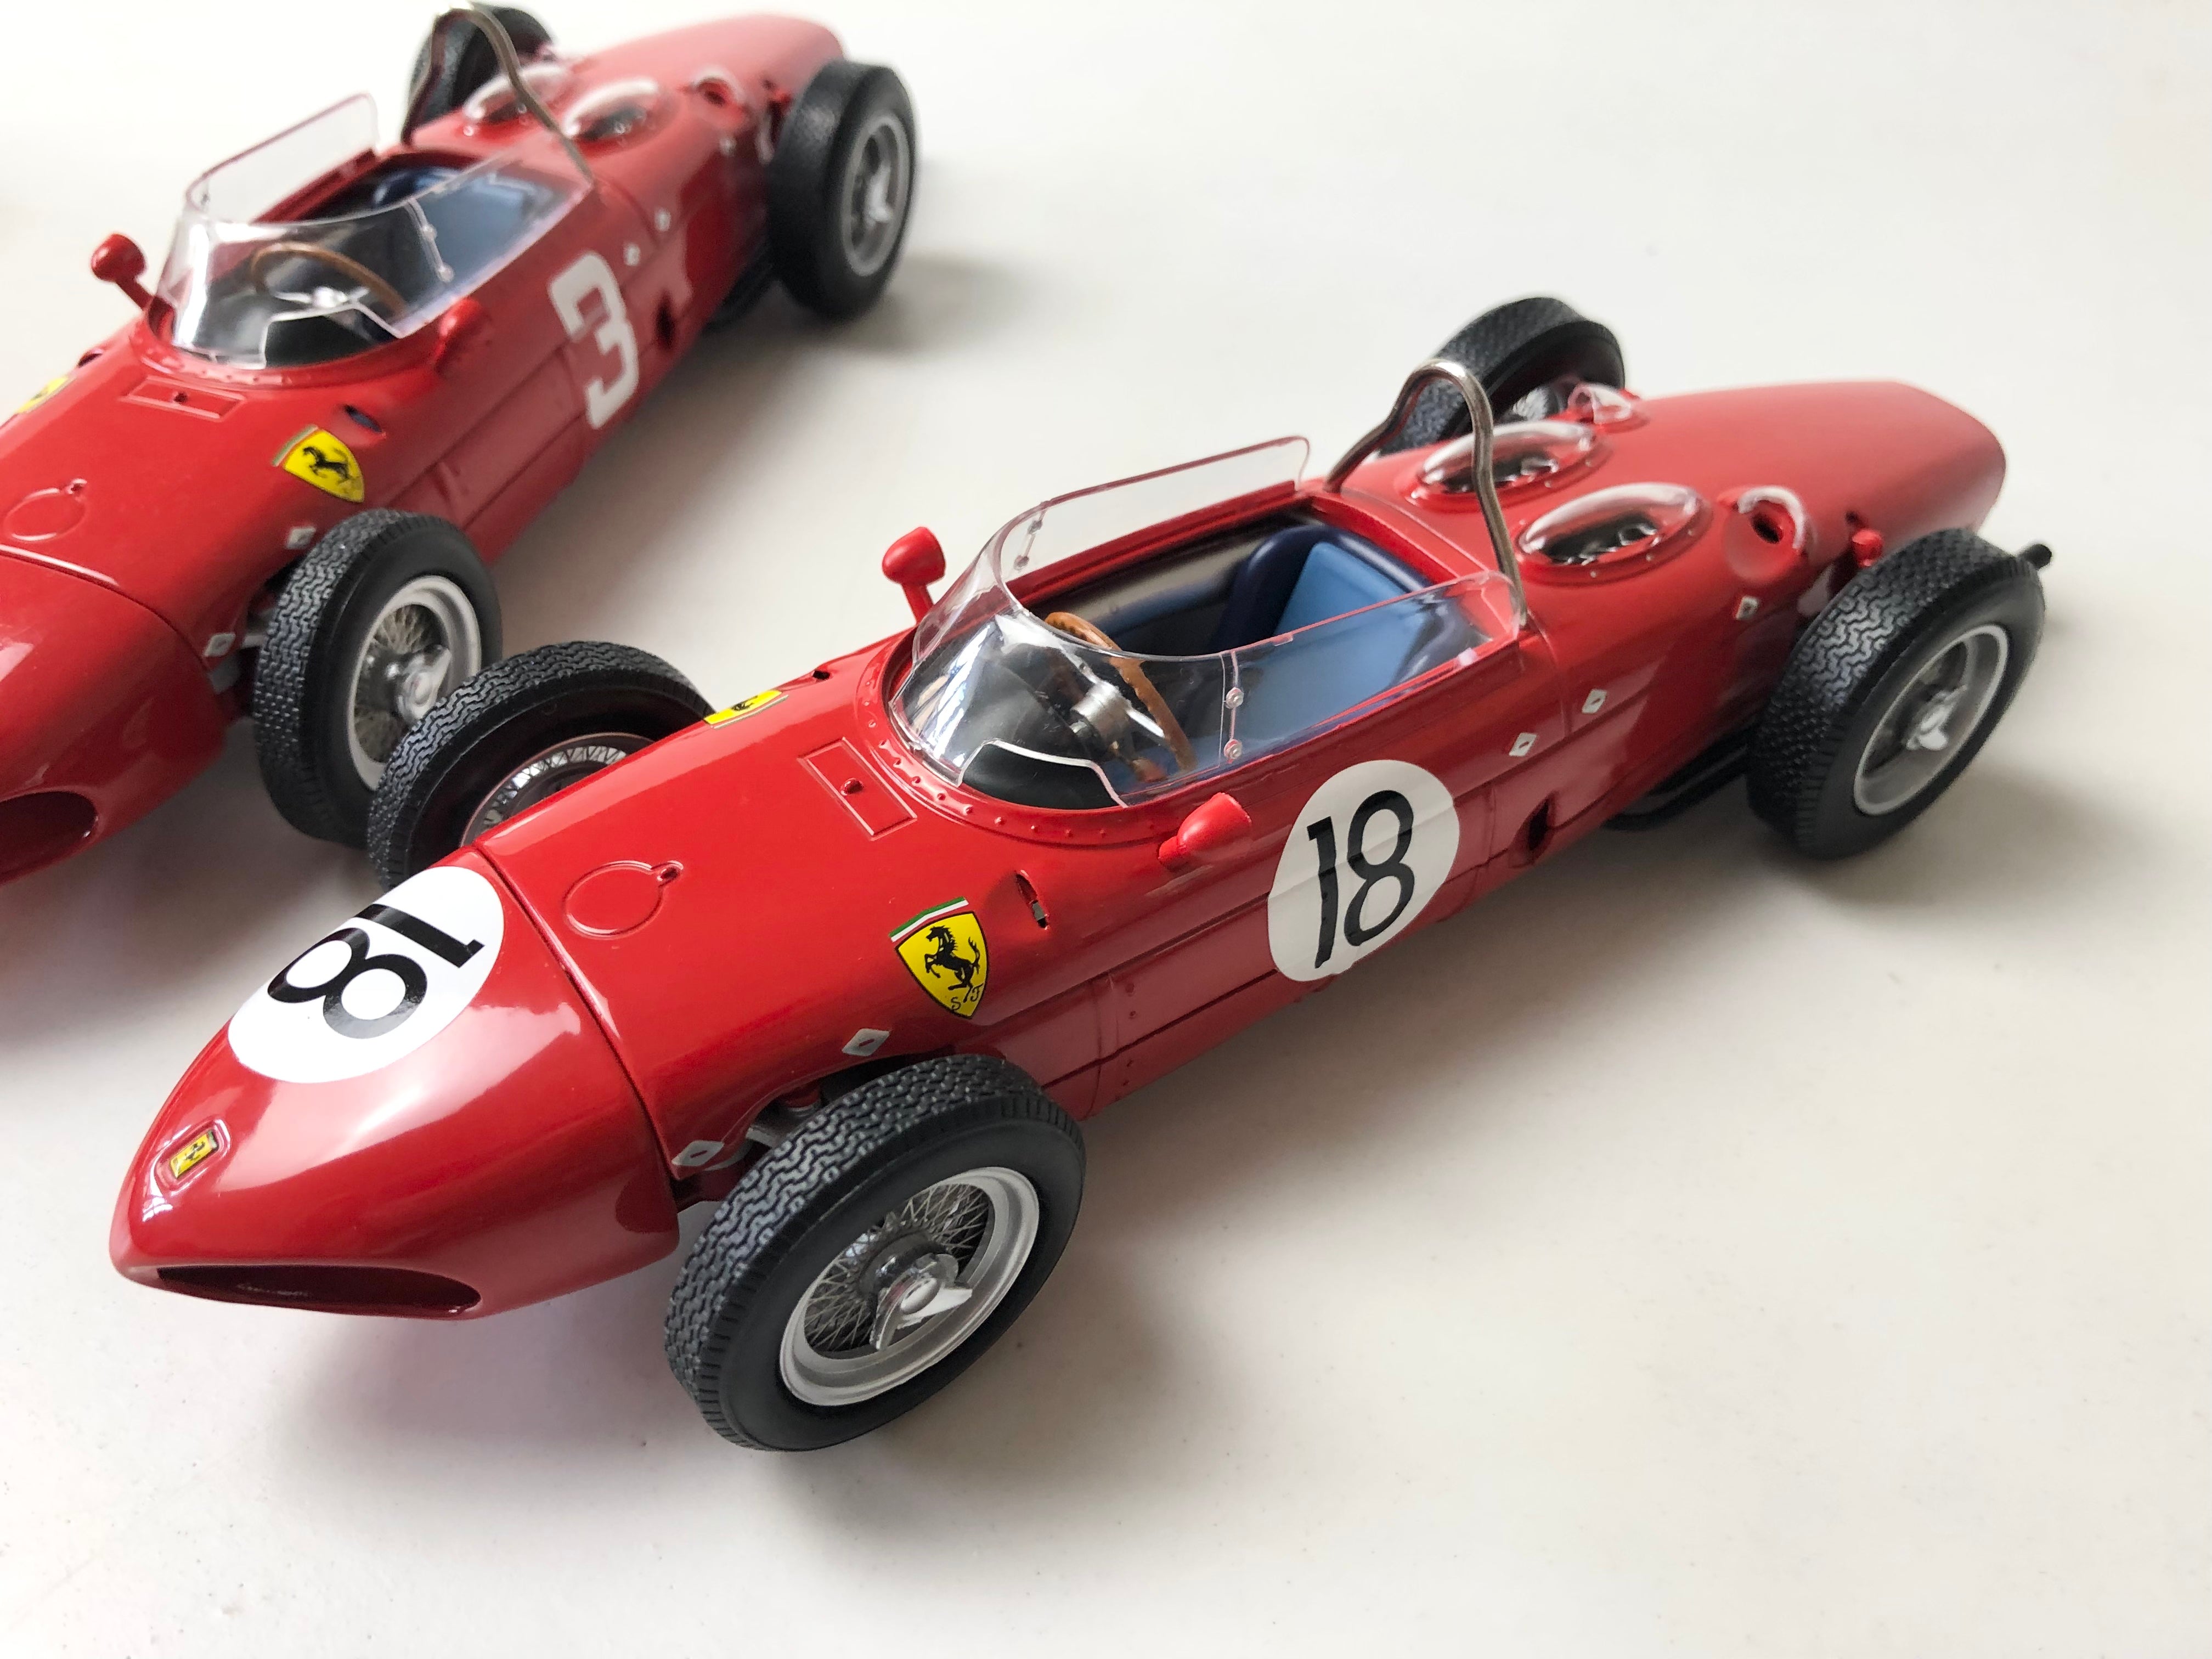 Trio of 1961 Ferrari 156 'Sharknose' 1:18 scale by CMR Models